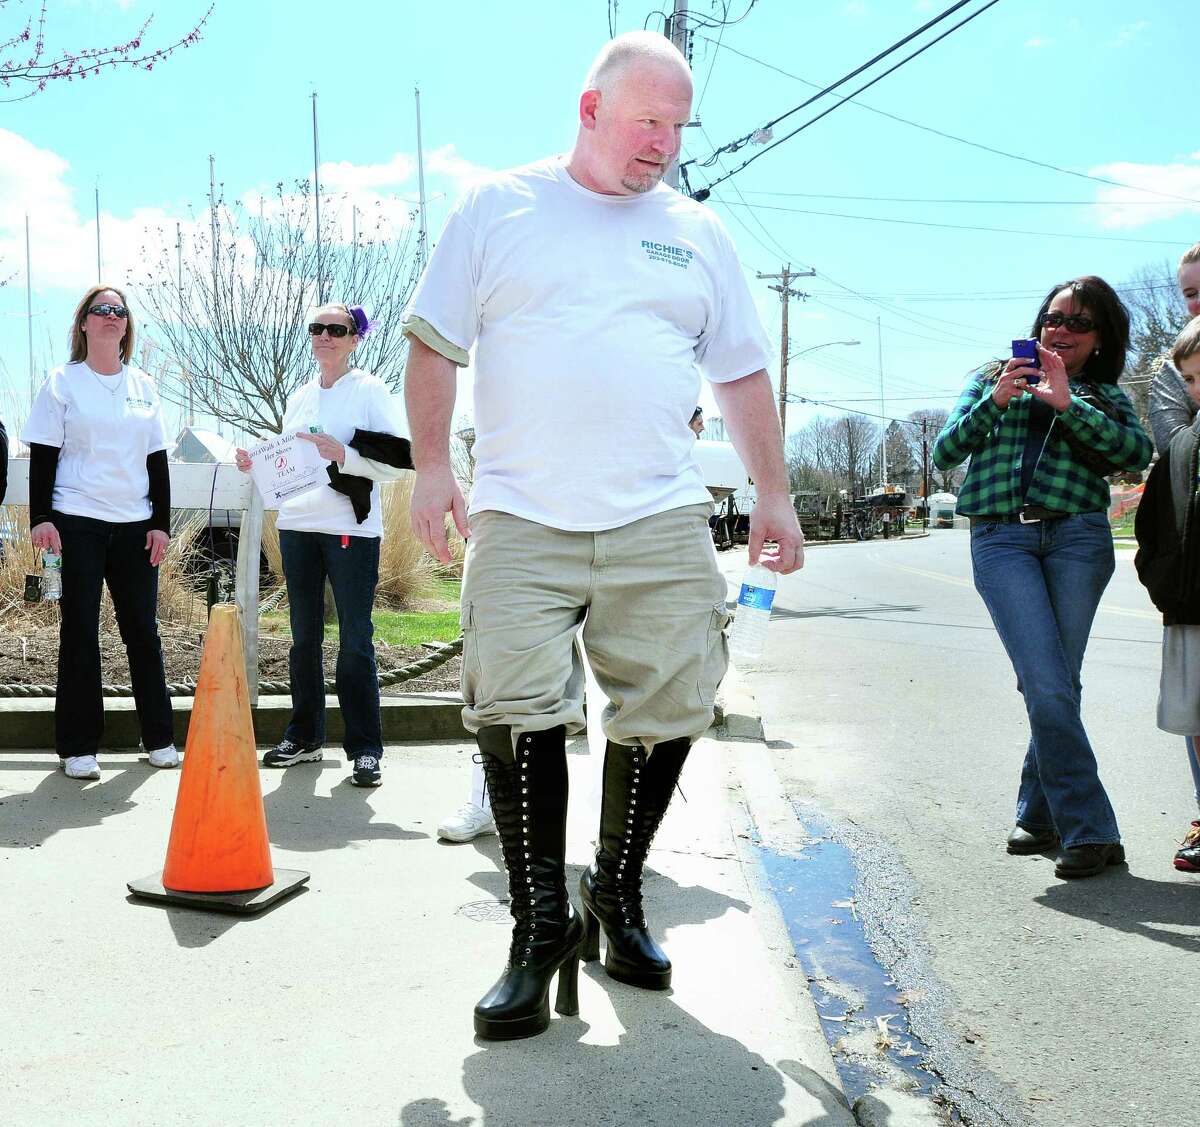 Tom Duggan of Milford shows off his black boots before the start of the 7th annual Walk A Mile In Her Shoes: The Men's March to Stop Rape, Sexual Assault & Gender Violence in Milford on 4/14/2013. Photo by Arnold Gold/New Haven Register AG0492E